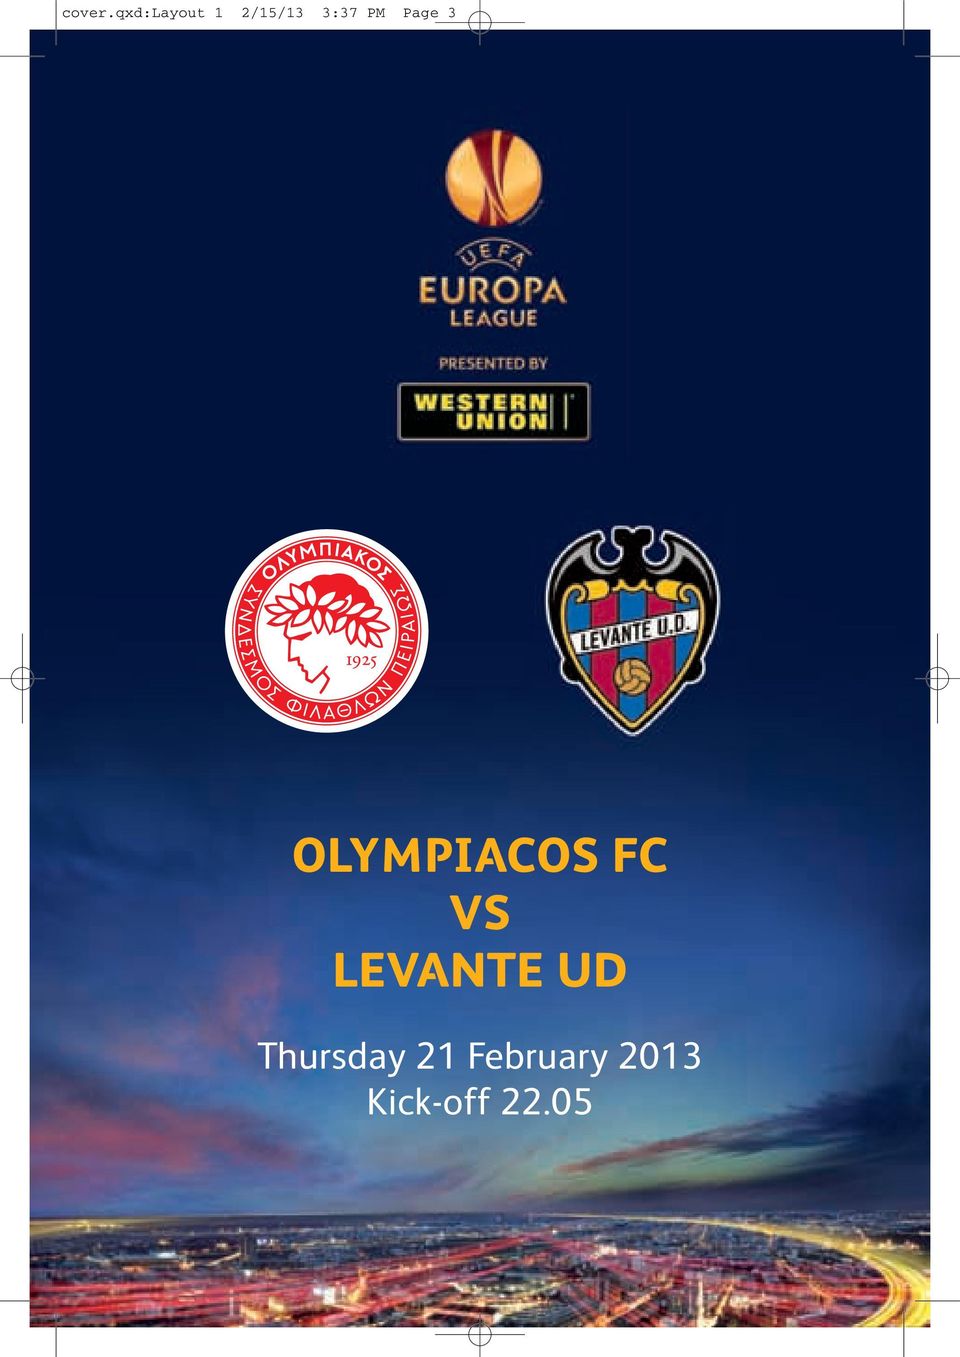 PM Page 3 OLYMPIACOS FC VS